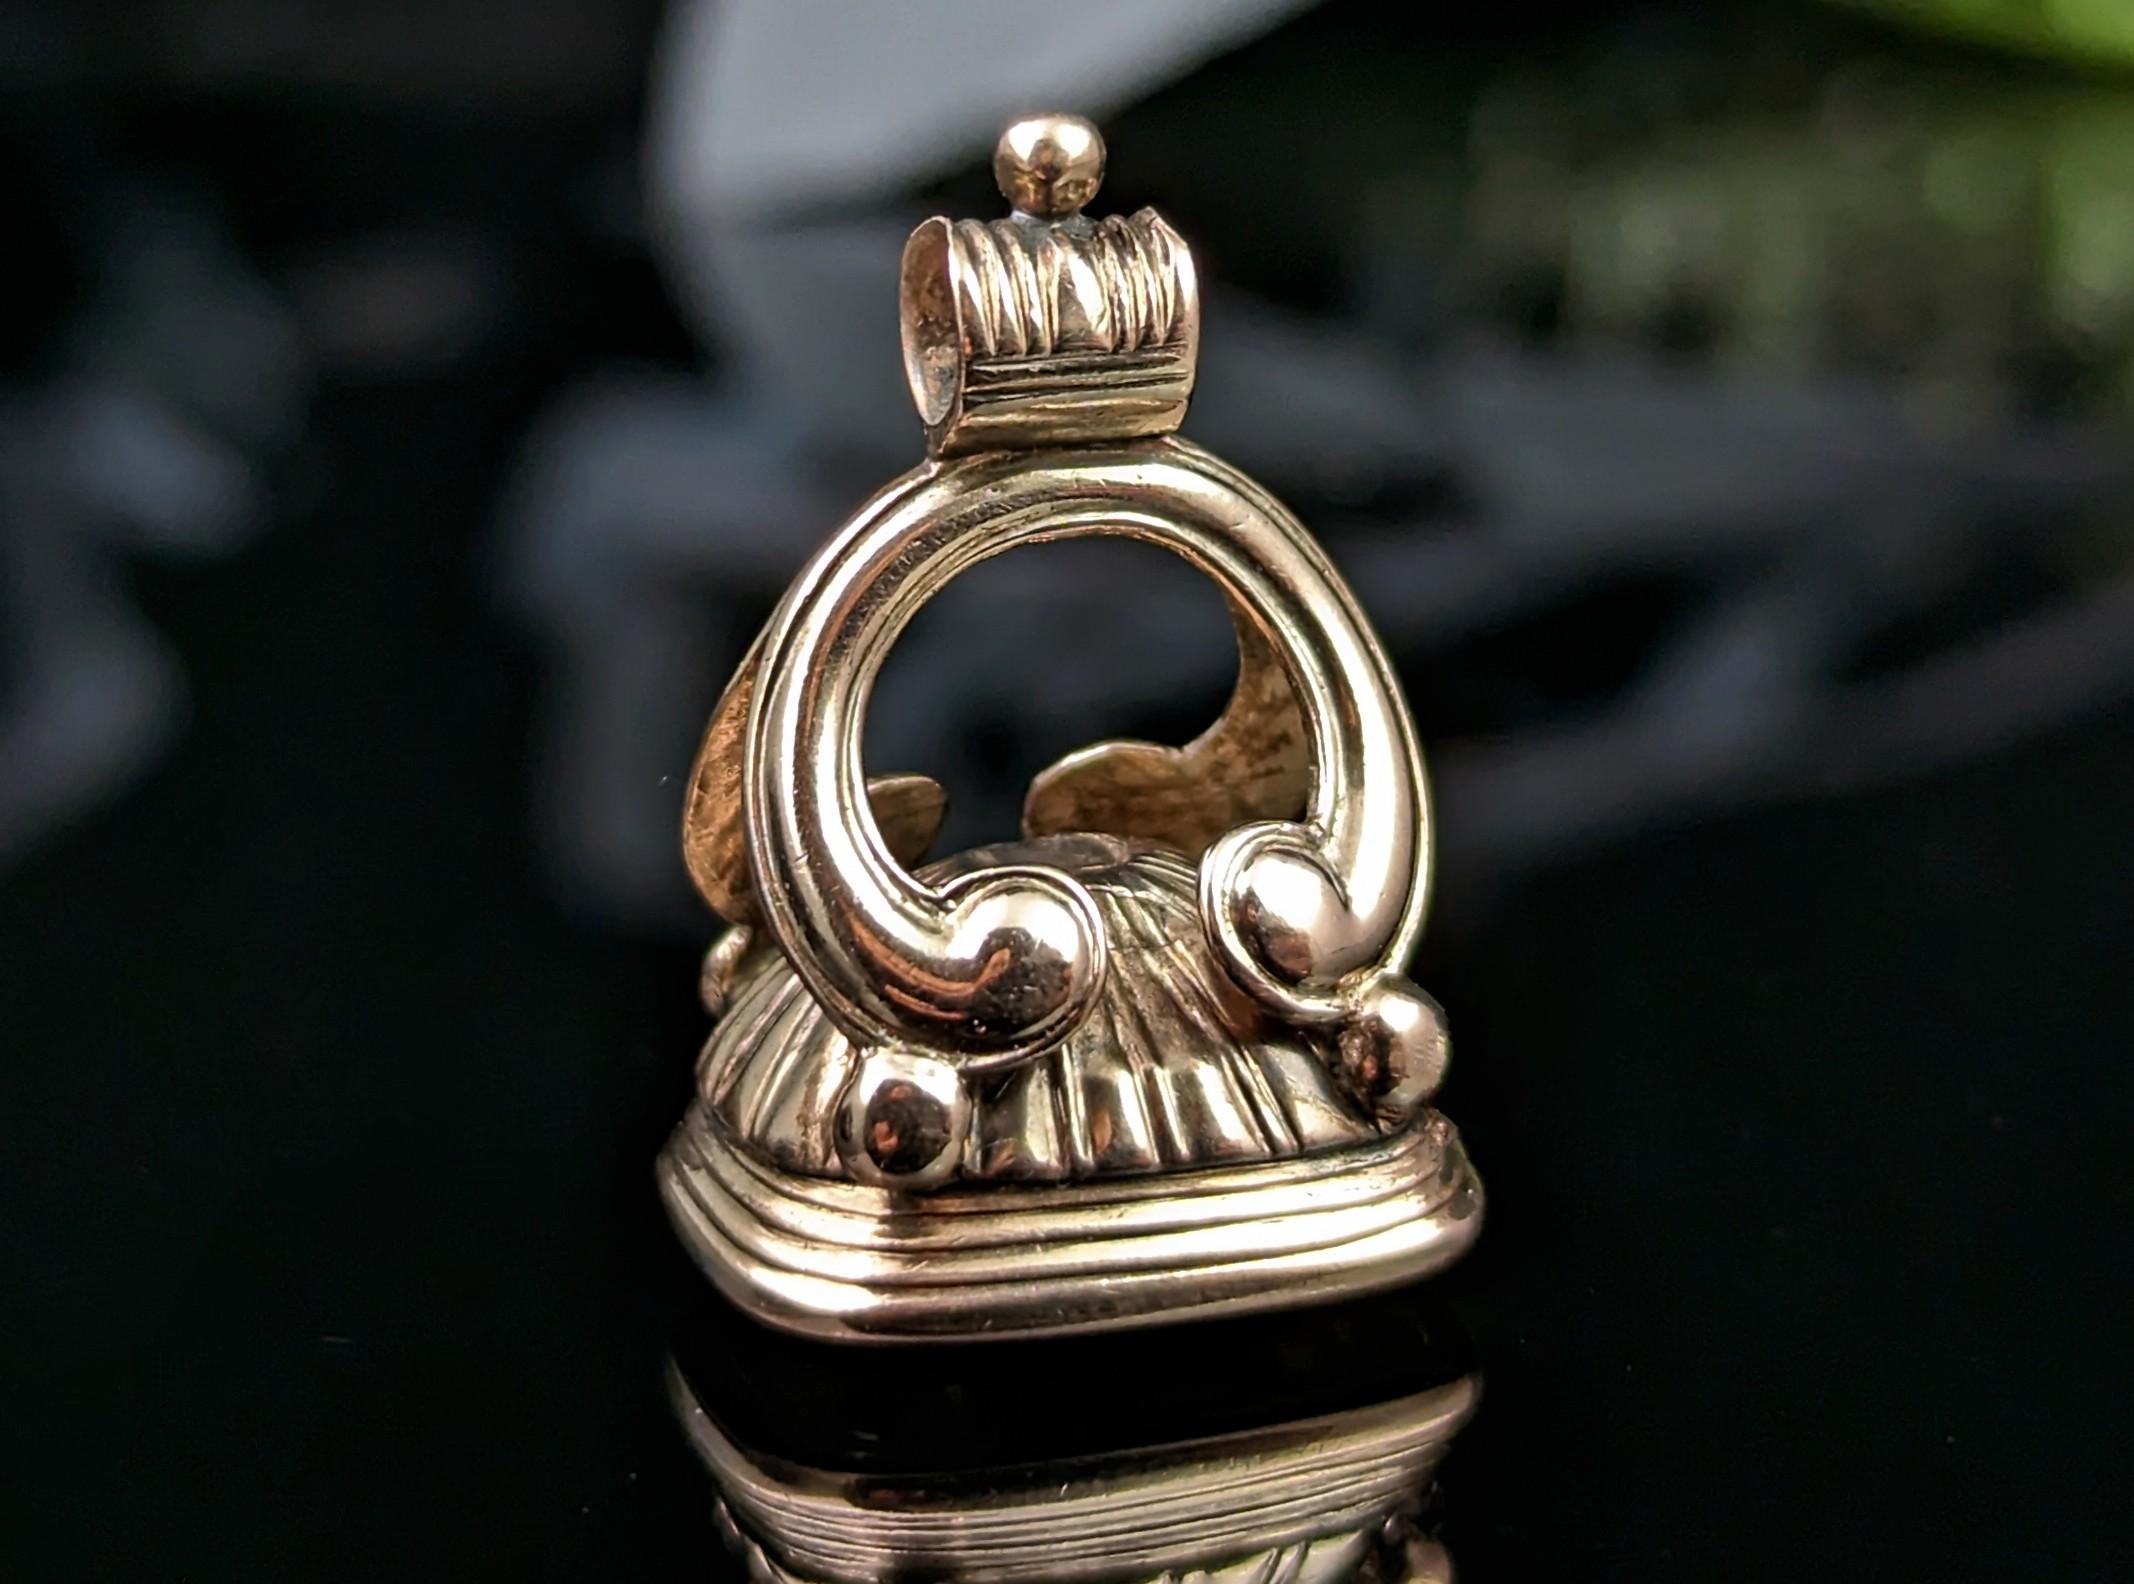 You can't go wrong with a beautiful antique seal fob, they are such versatile pieces and can be worn in many ways, from pendants to Albert chain fobs

Made from 9kt rose gold cased metal, probably with a bronze core, late Georgian era, it has a